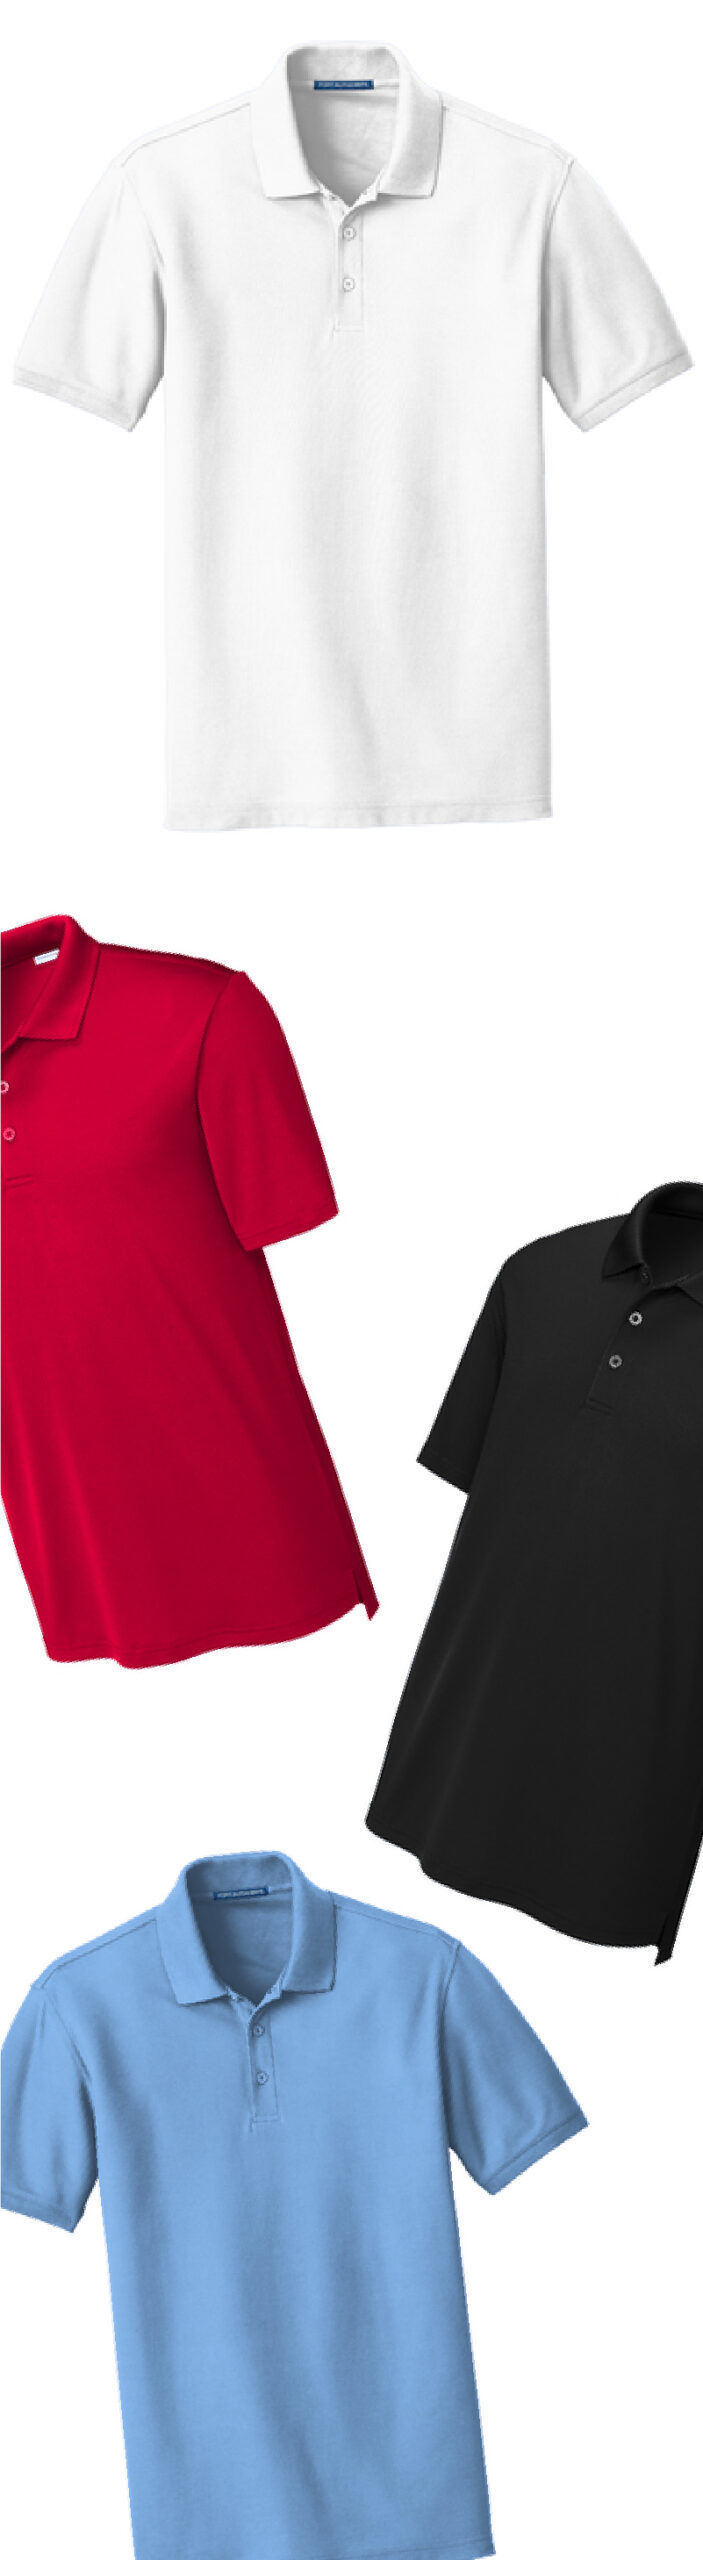 Multiple Polo Shirts: Classic and Slim Fit Options